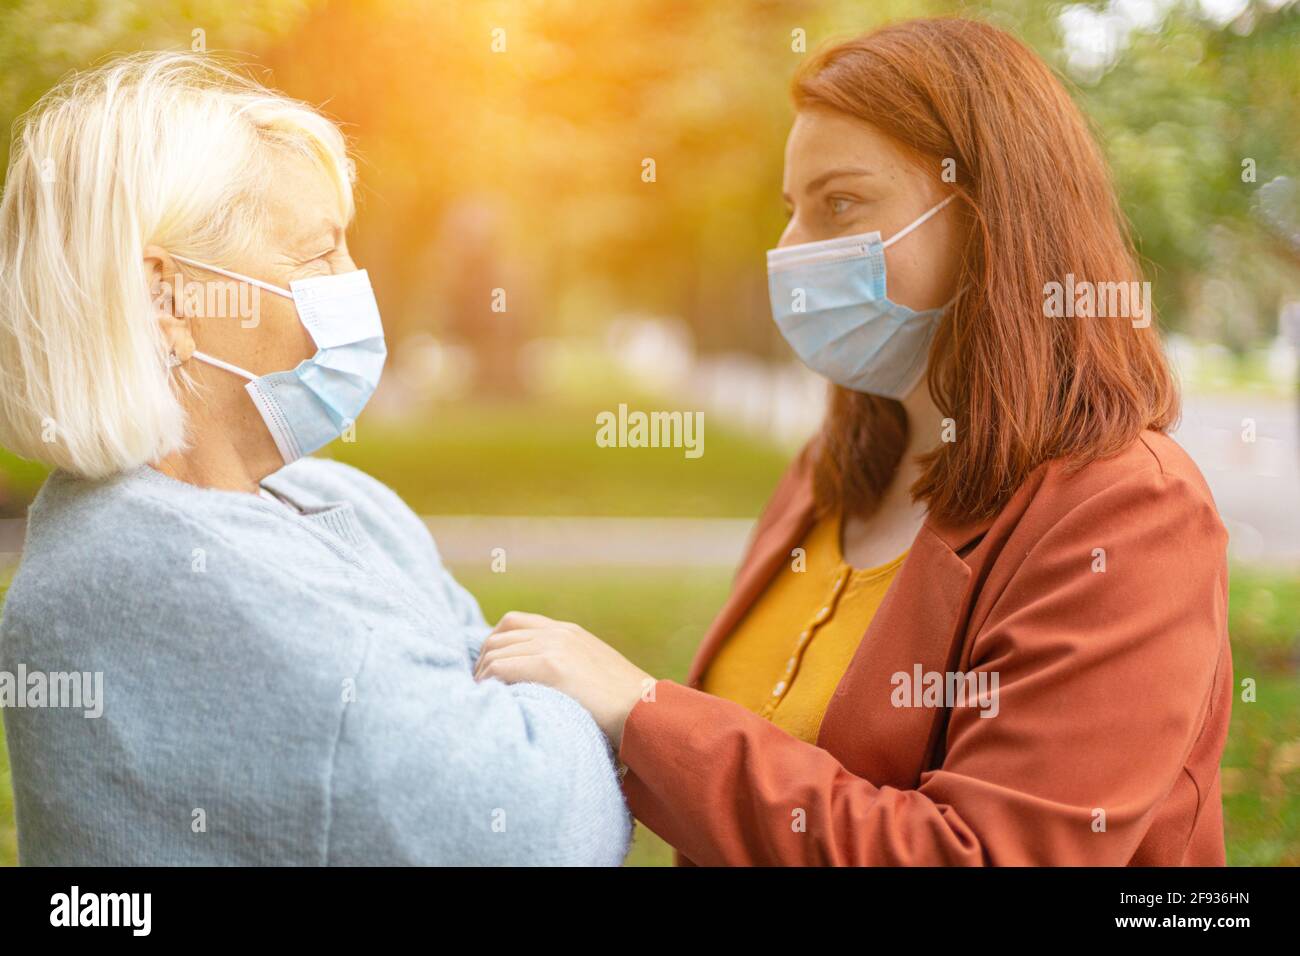 Family hug. Mother and daughter with protective surgical face masks in the park. Love and friendship concept. Stock Photo